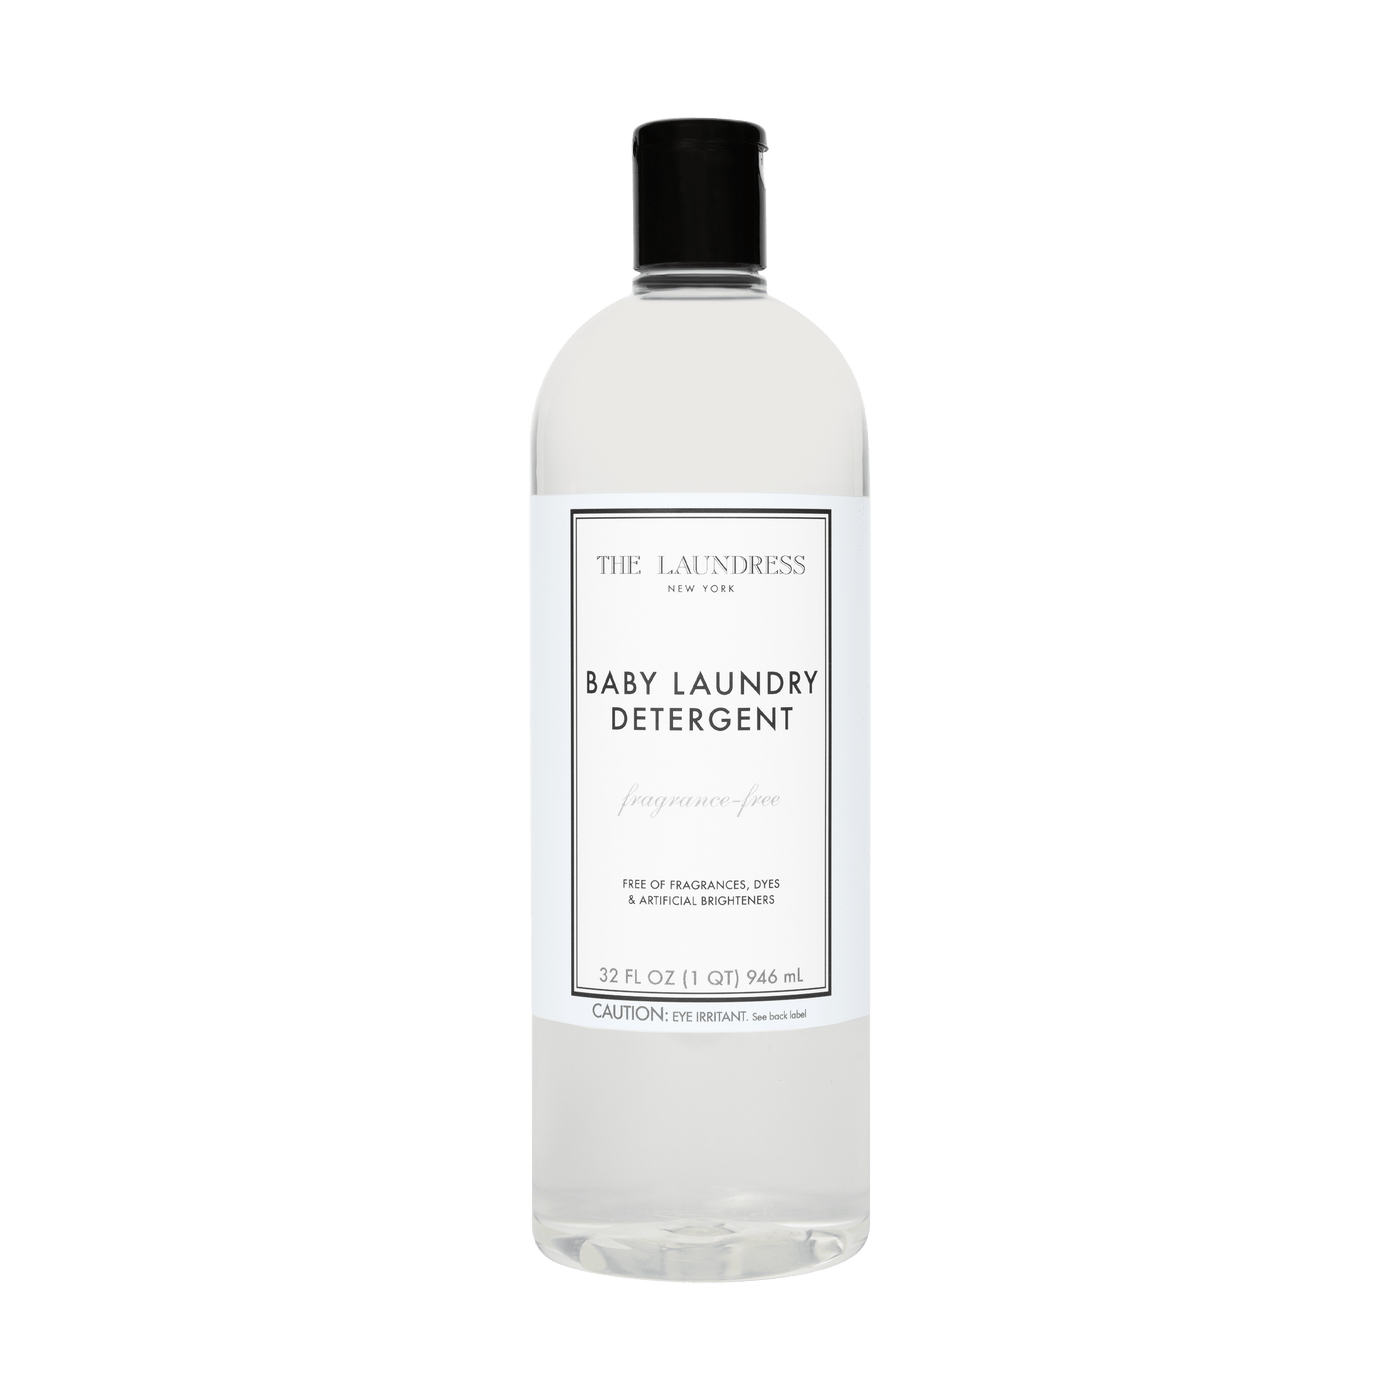 The Laundress Fragrance Free Baby Laundry Detergent, free of fragrances, dyes & artificial brighteners.